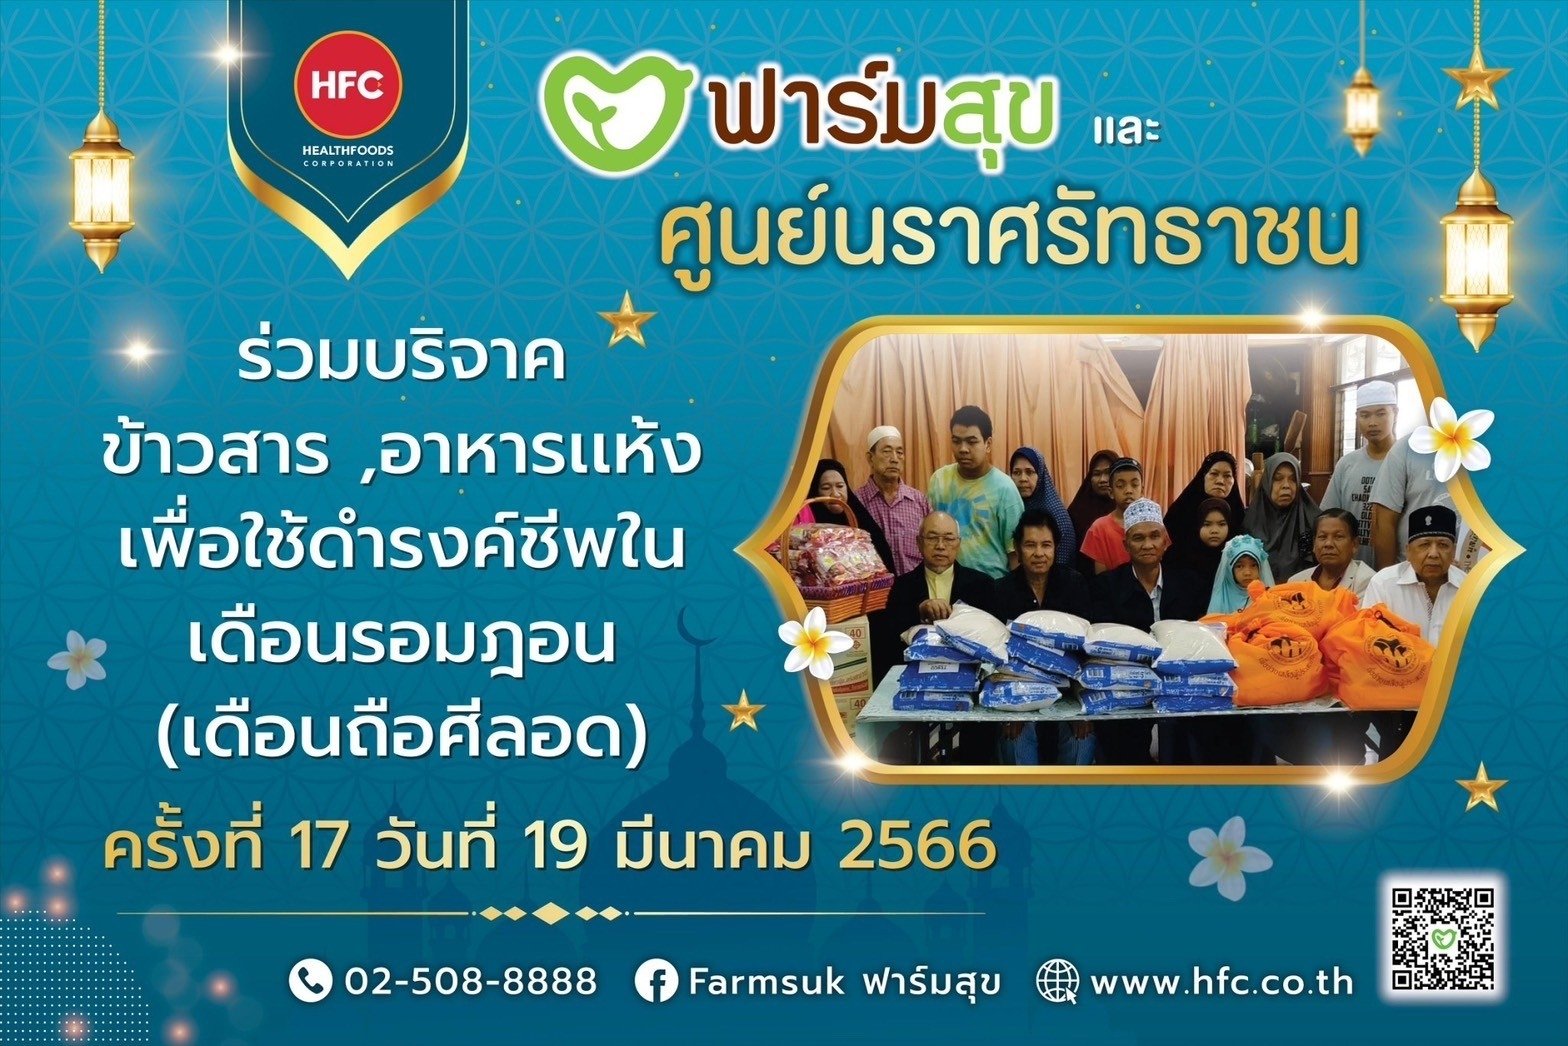 HFC joins in supporting the Ramadan religious ceremonies at The Nara Satsadajarn Center in Mueang District, Narathiwat Province